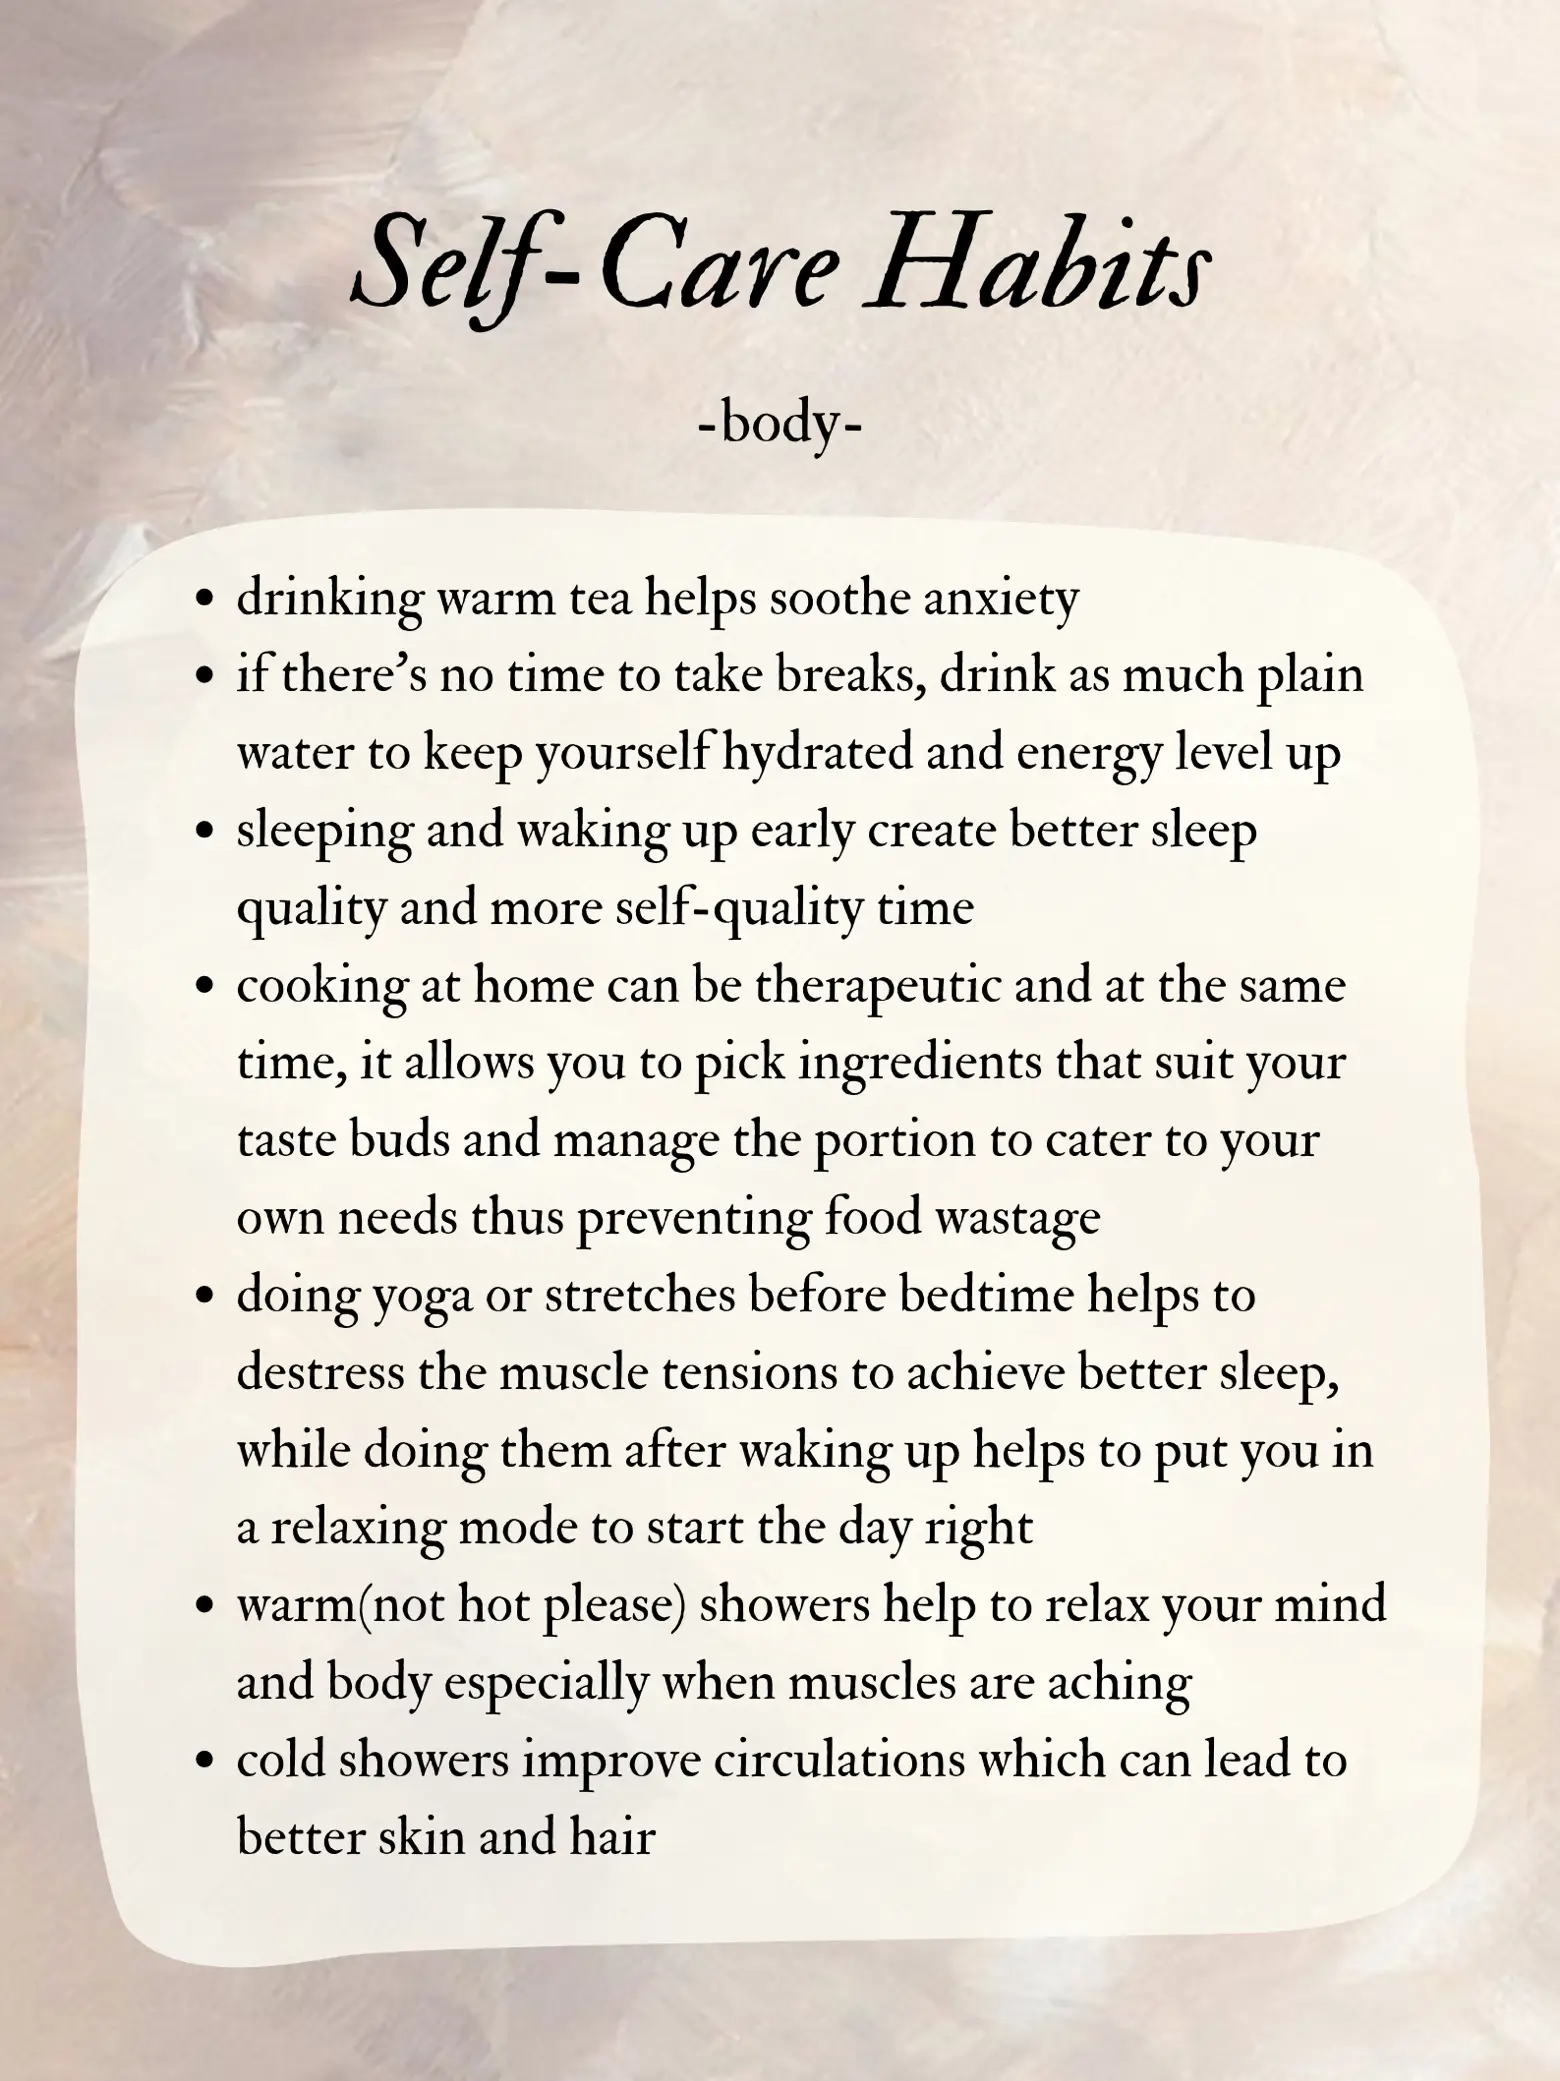 Self-Care Habits (body, mind and soul)'s images(3)